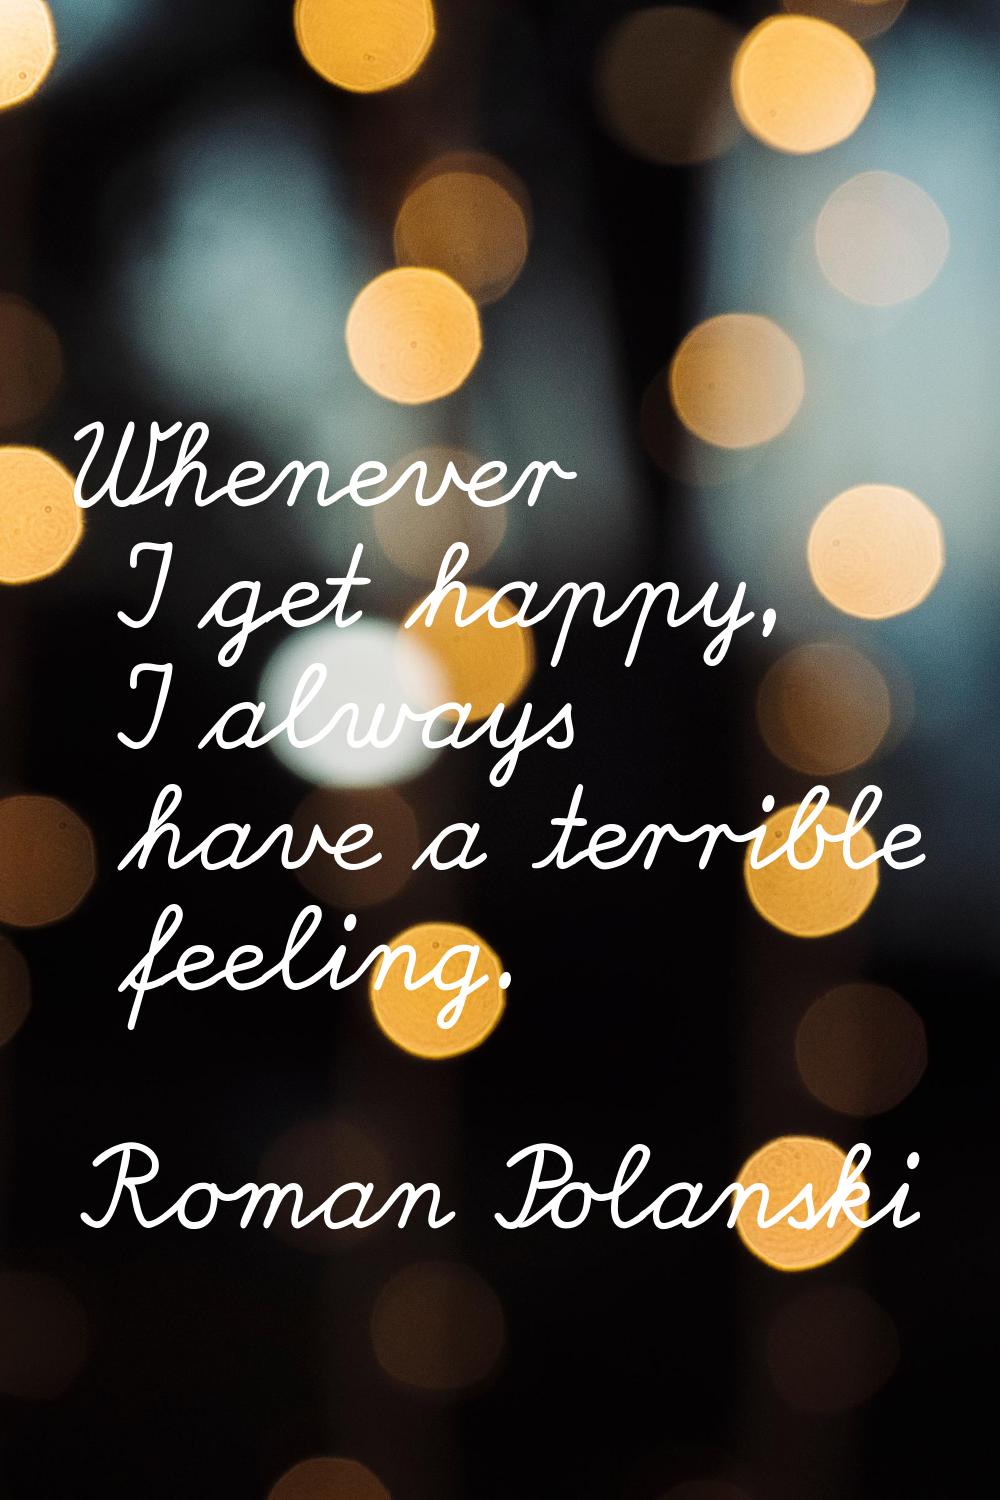 Whenever I get happy, I always have a terrible feeling.